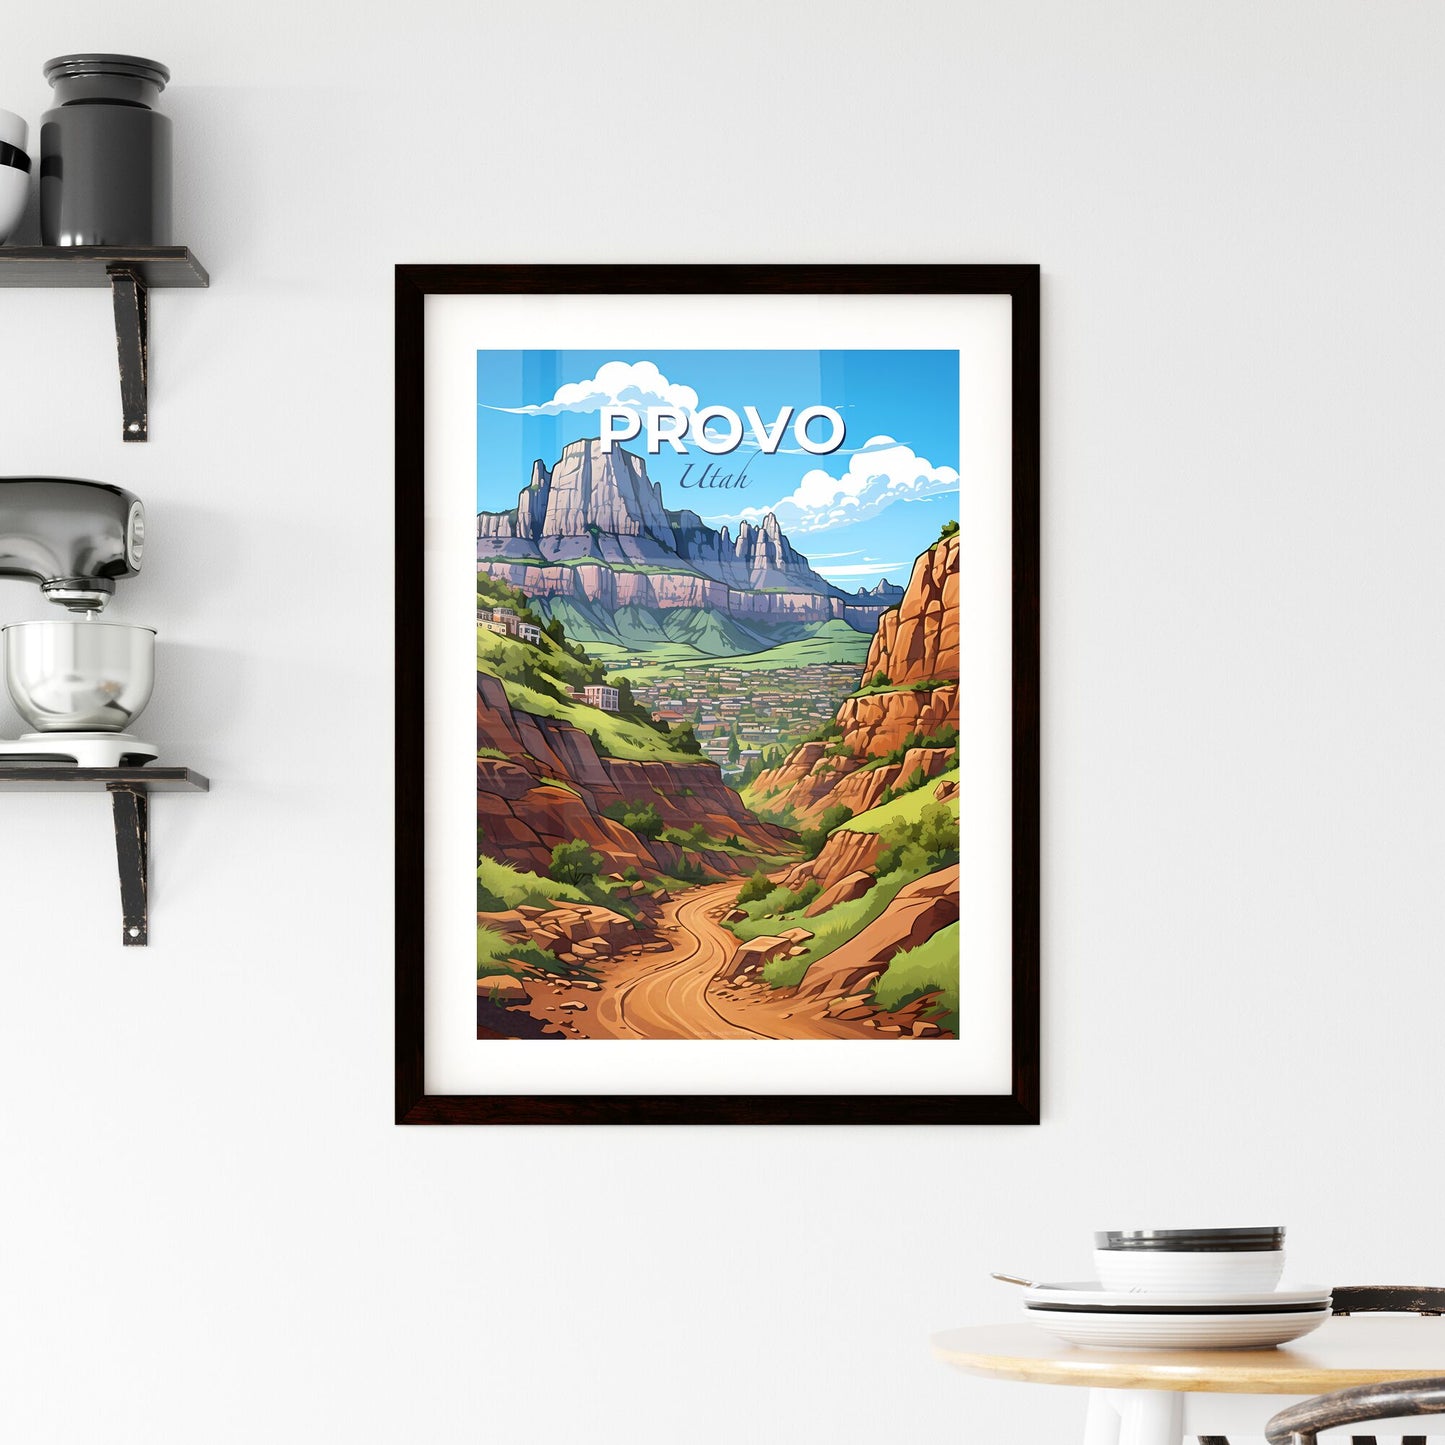 Provo, Utah, A Poster of a landscape of a valley with a road and mountains Default Title